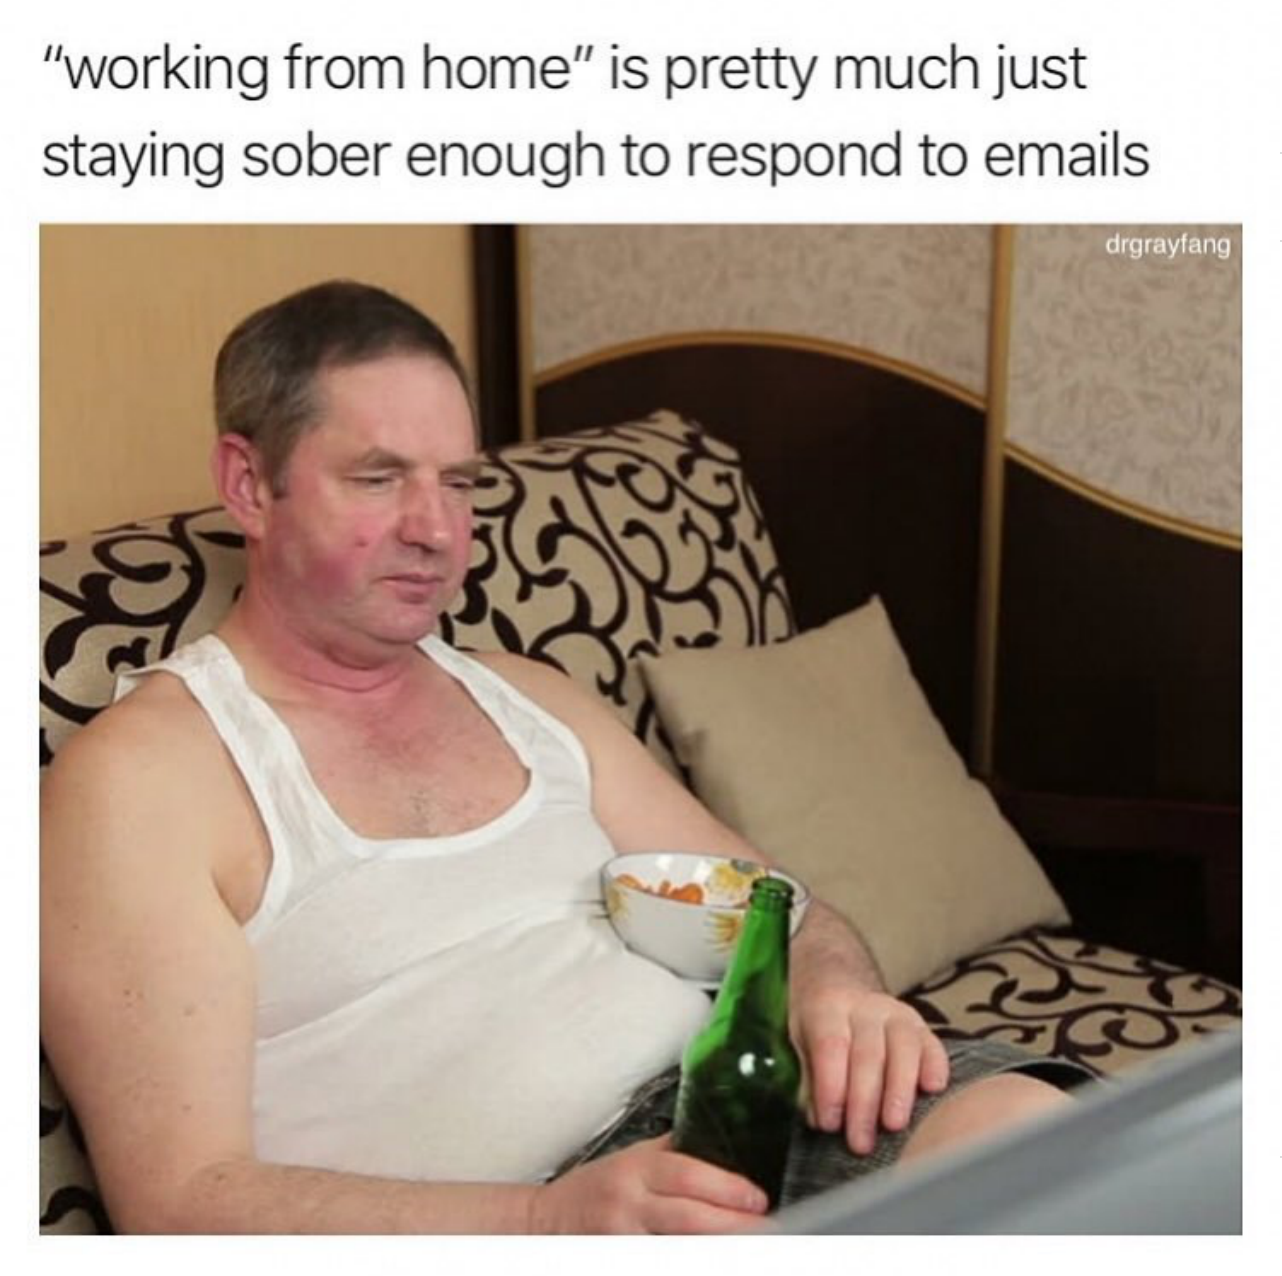 work memes - working from home sober meme - "working from home" is pretty much just staying sober enough to respond to emails degraytang